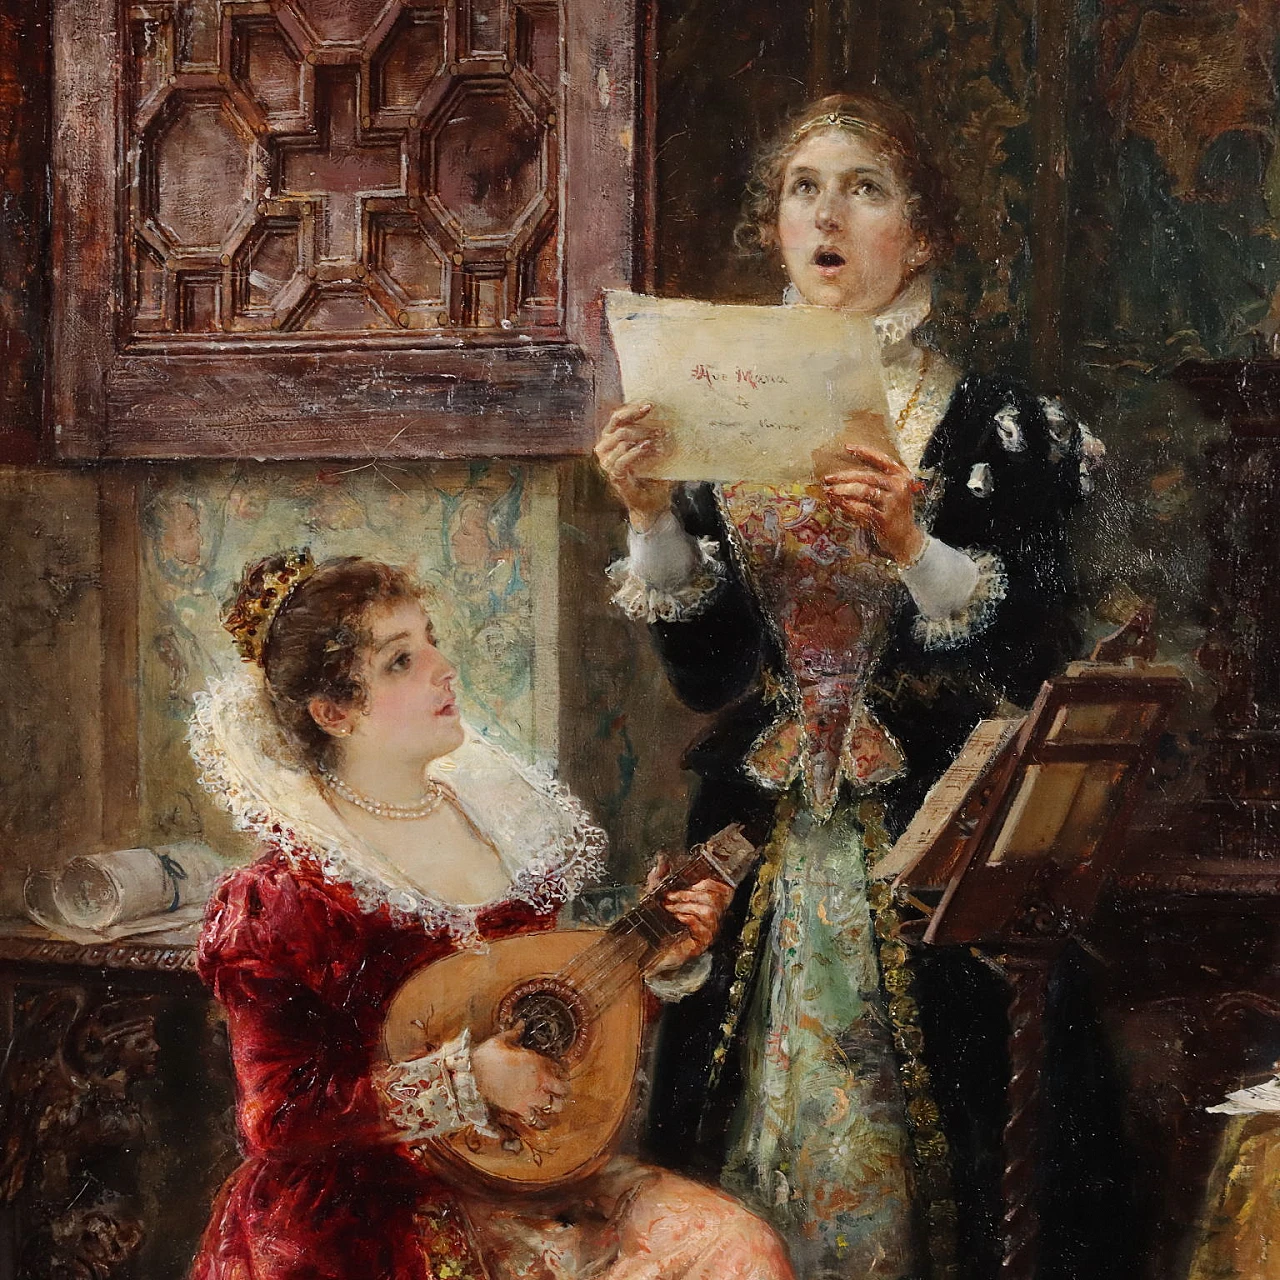 Vicente March, The concert, oil on canvas, 19th century 3